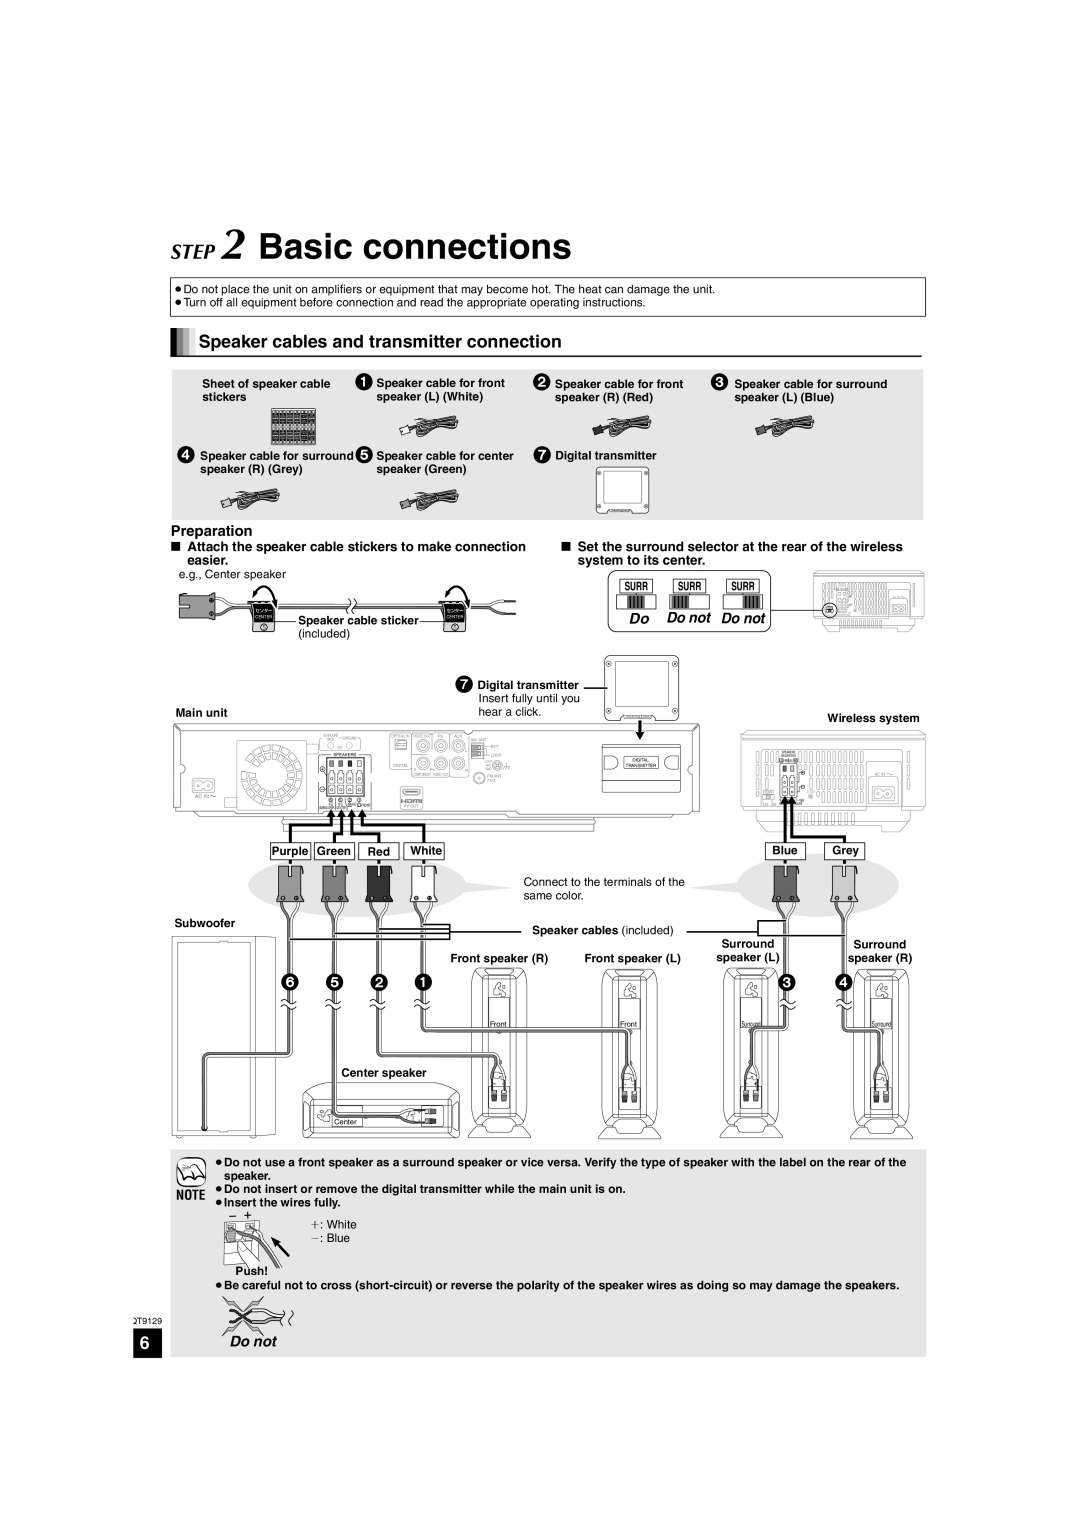 Panasonic SC-BT100 Basic connections, Speaker cables and transmitter connection, Preparation, 6Do not, easier, Blue, Grey 